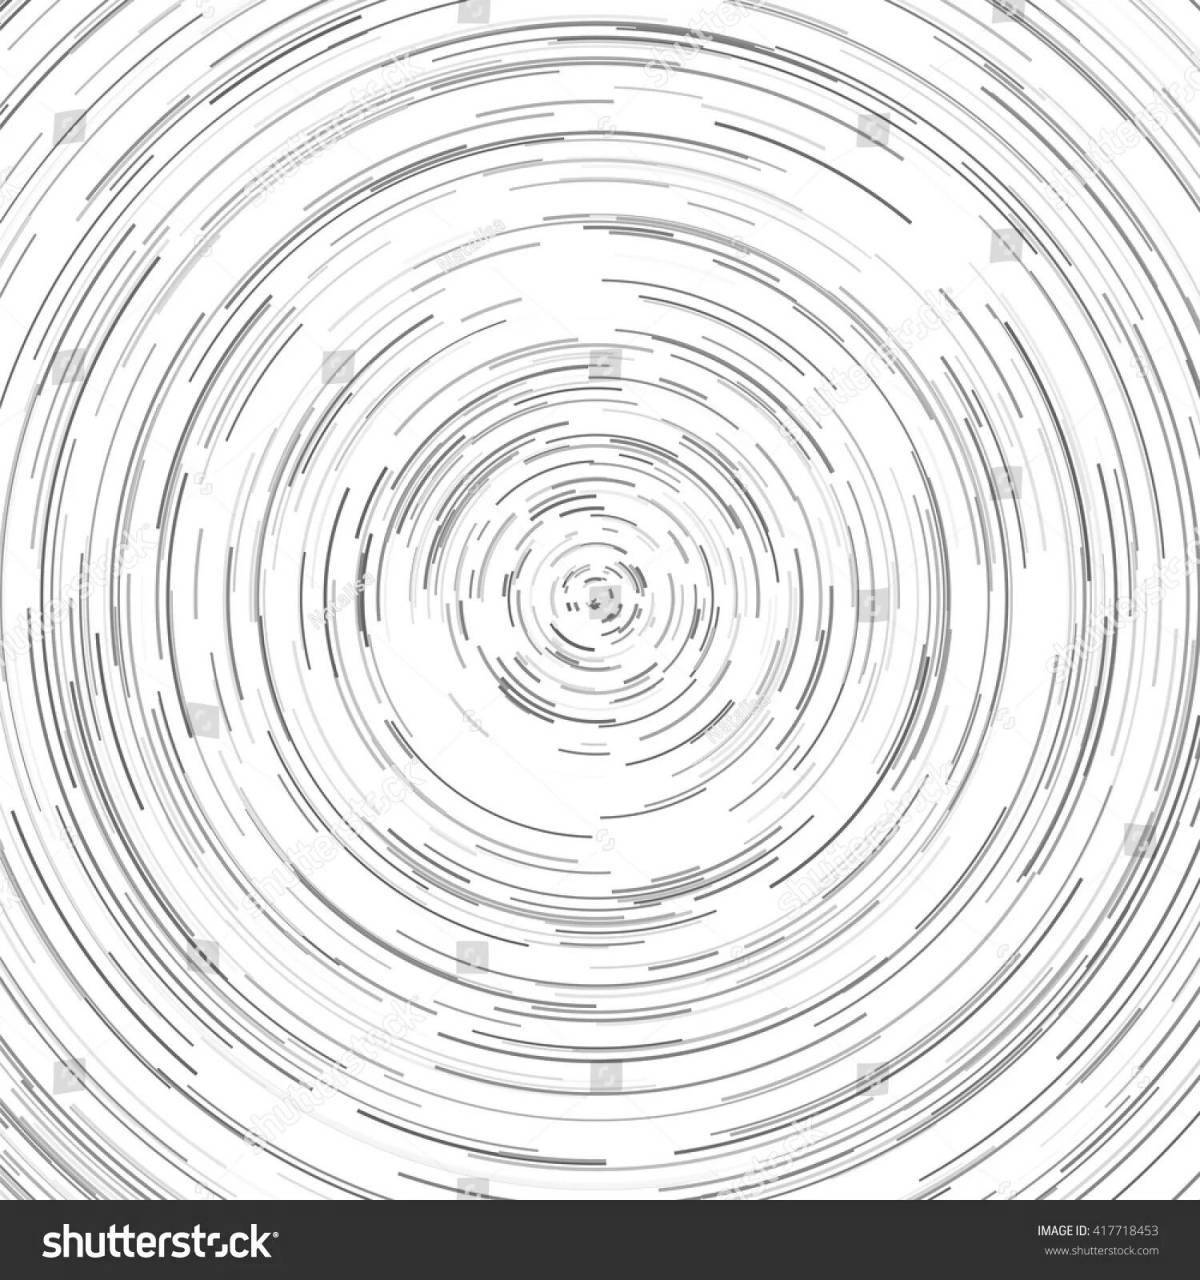 Peaceful spiral coloring